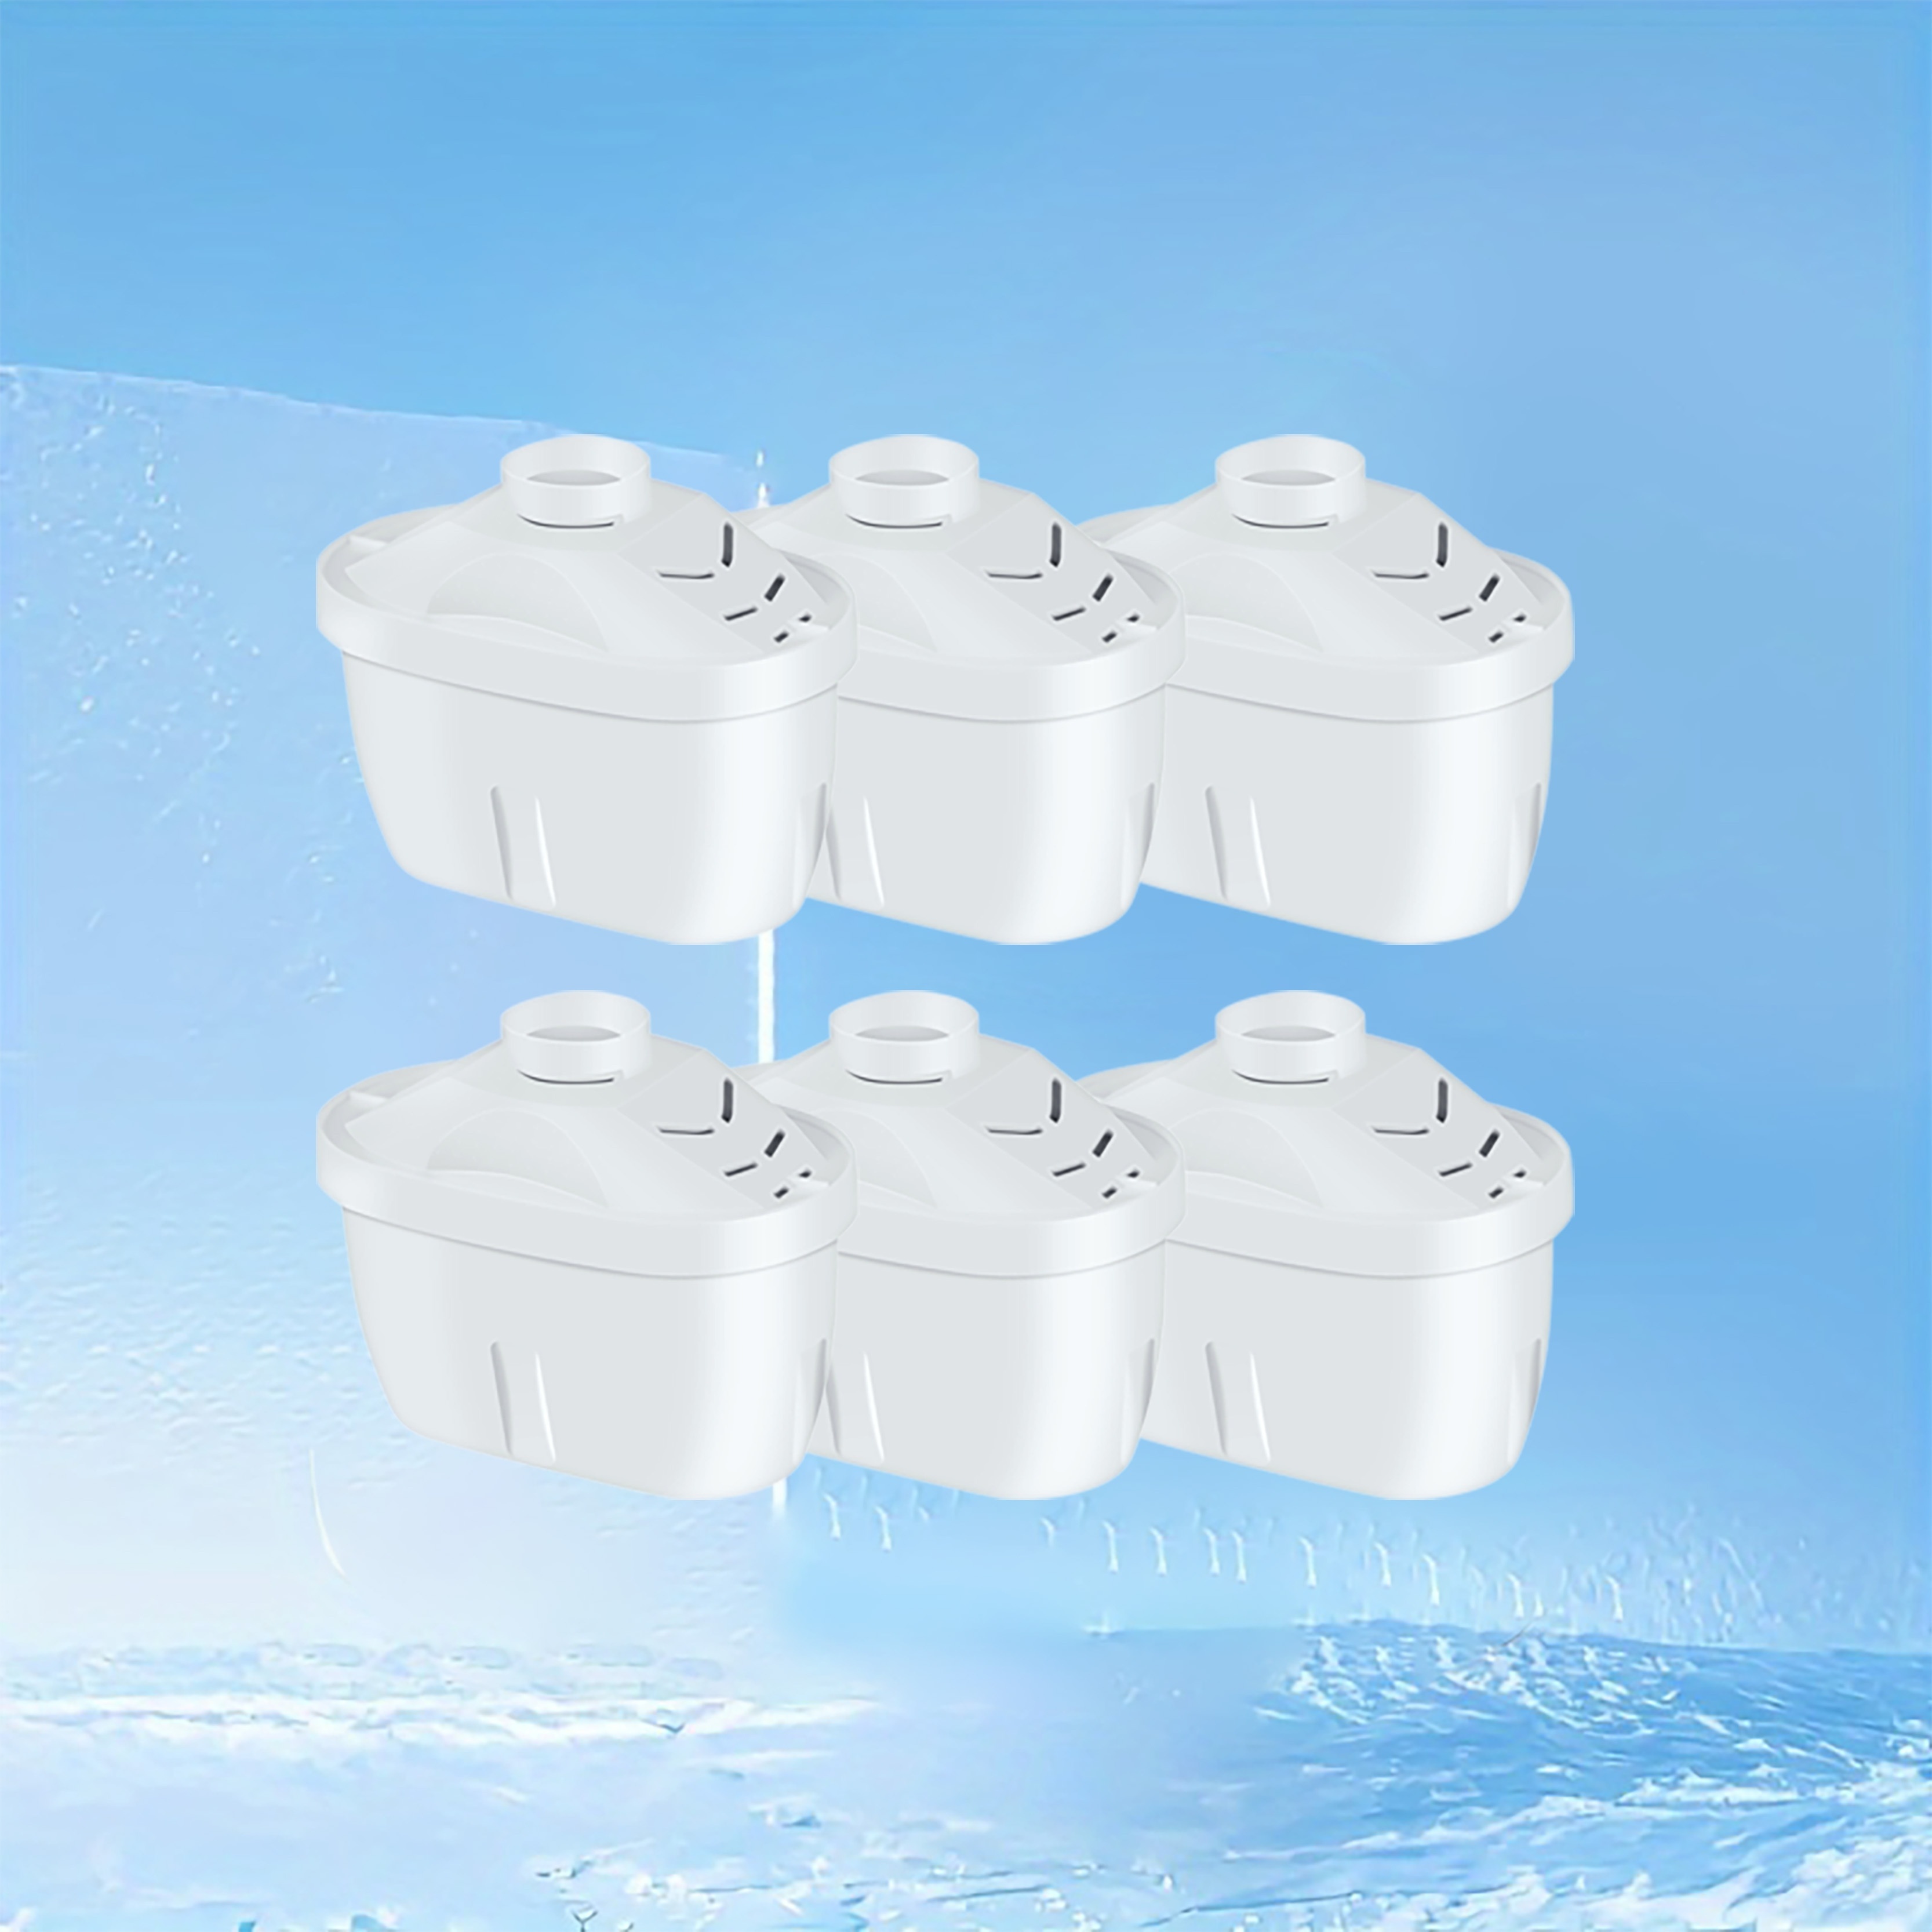 

6pcs General Standard For Alternative Water Filters, Suitable For Pitchers And Dispensers, Lasting For 2 Months, Reducing Chlorine And Odor, Water Filter Accessories